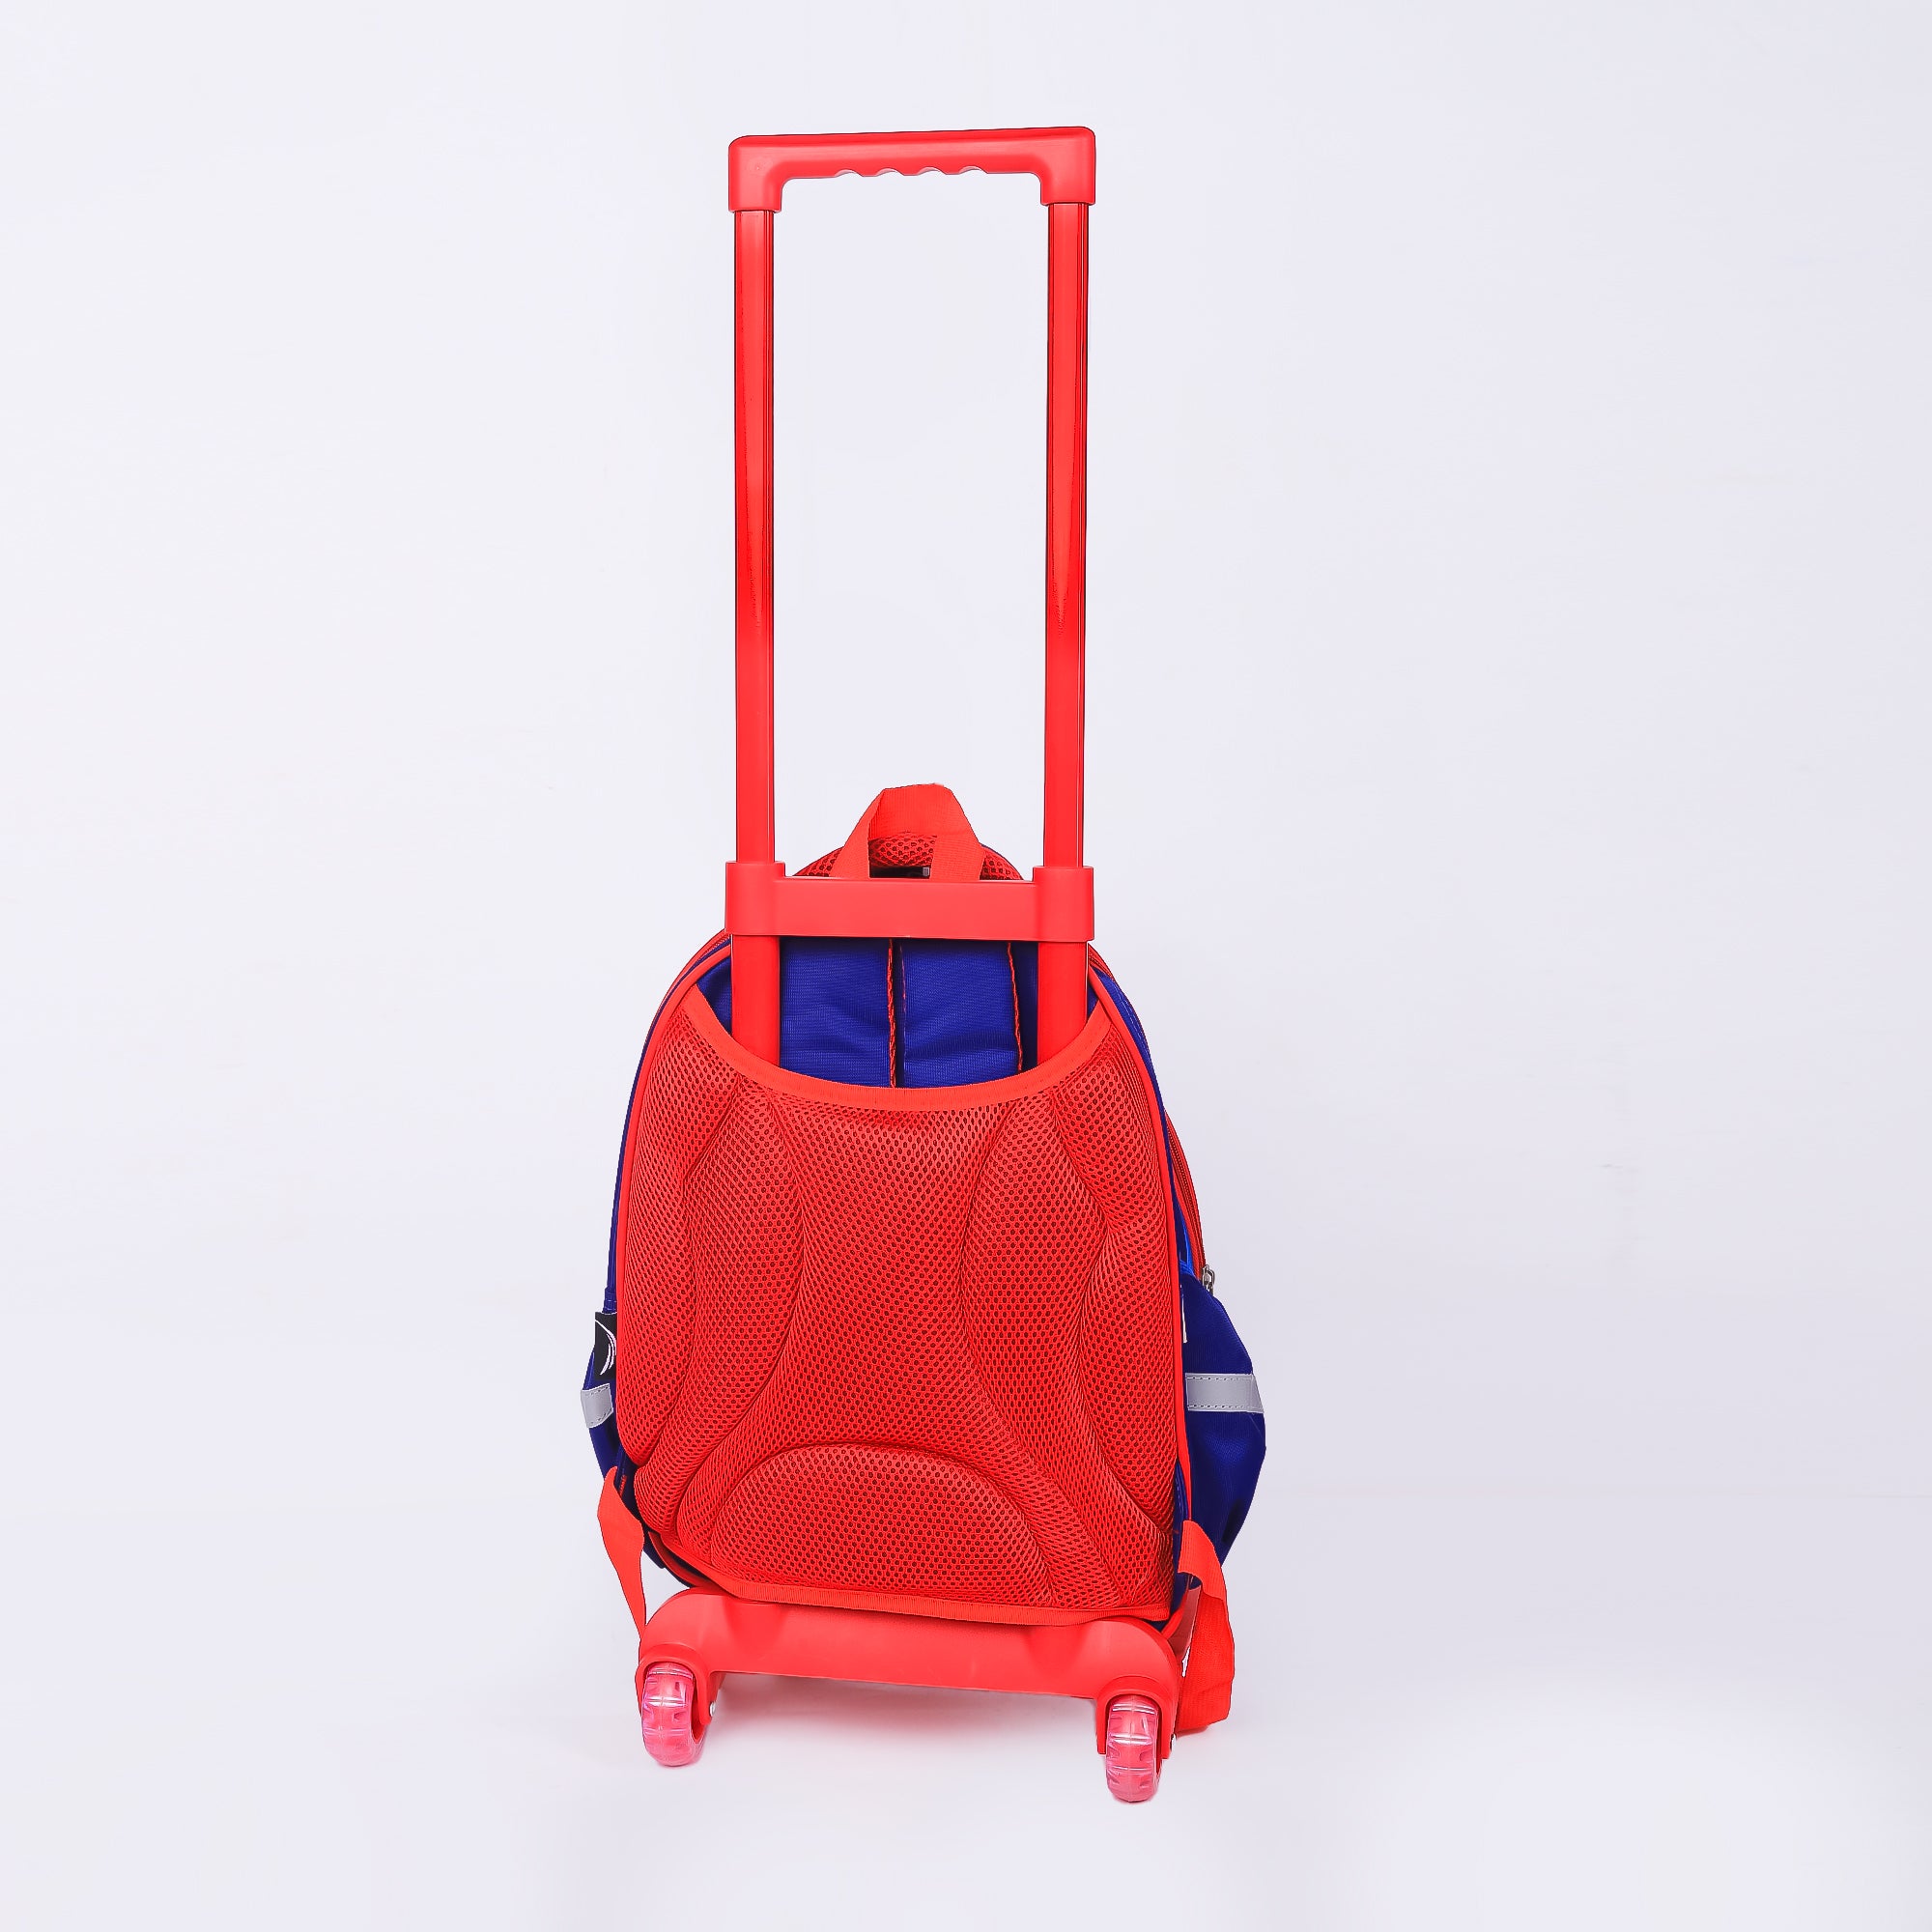 Spider Man Trolly Bag For Kids 14 INCH